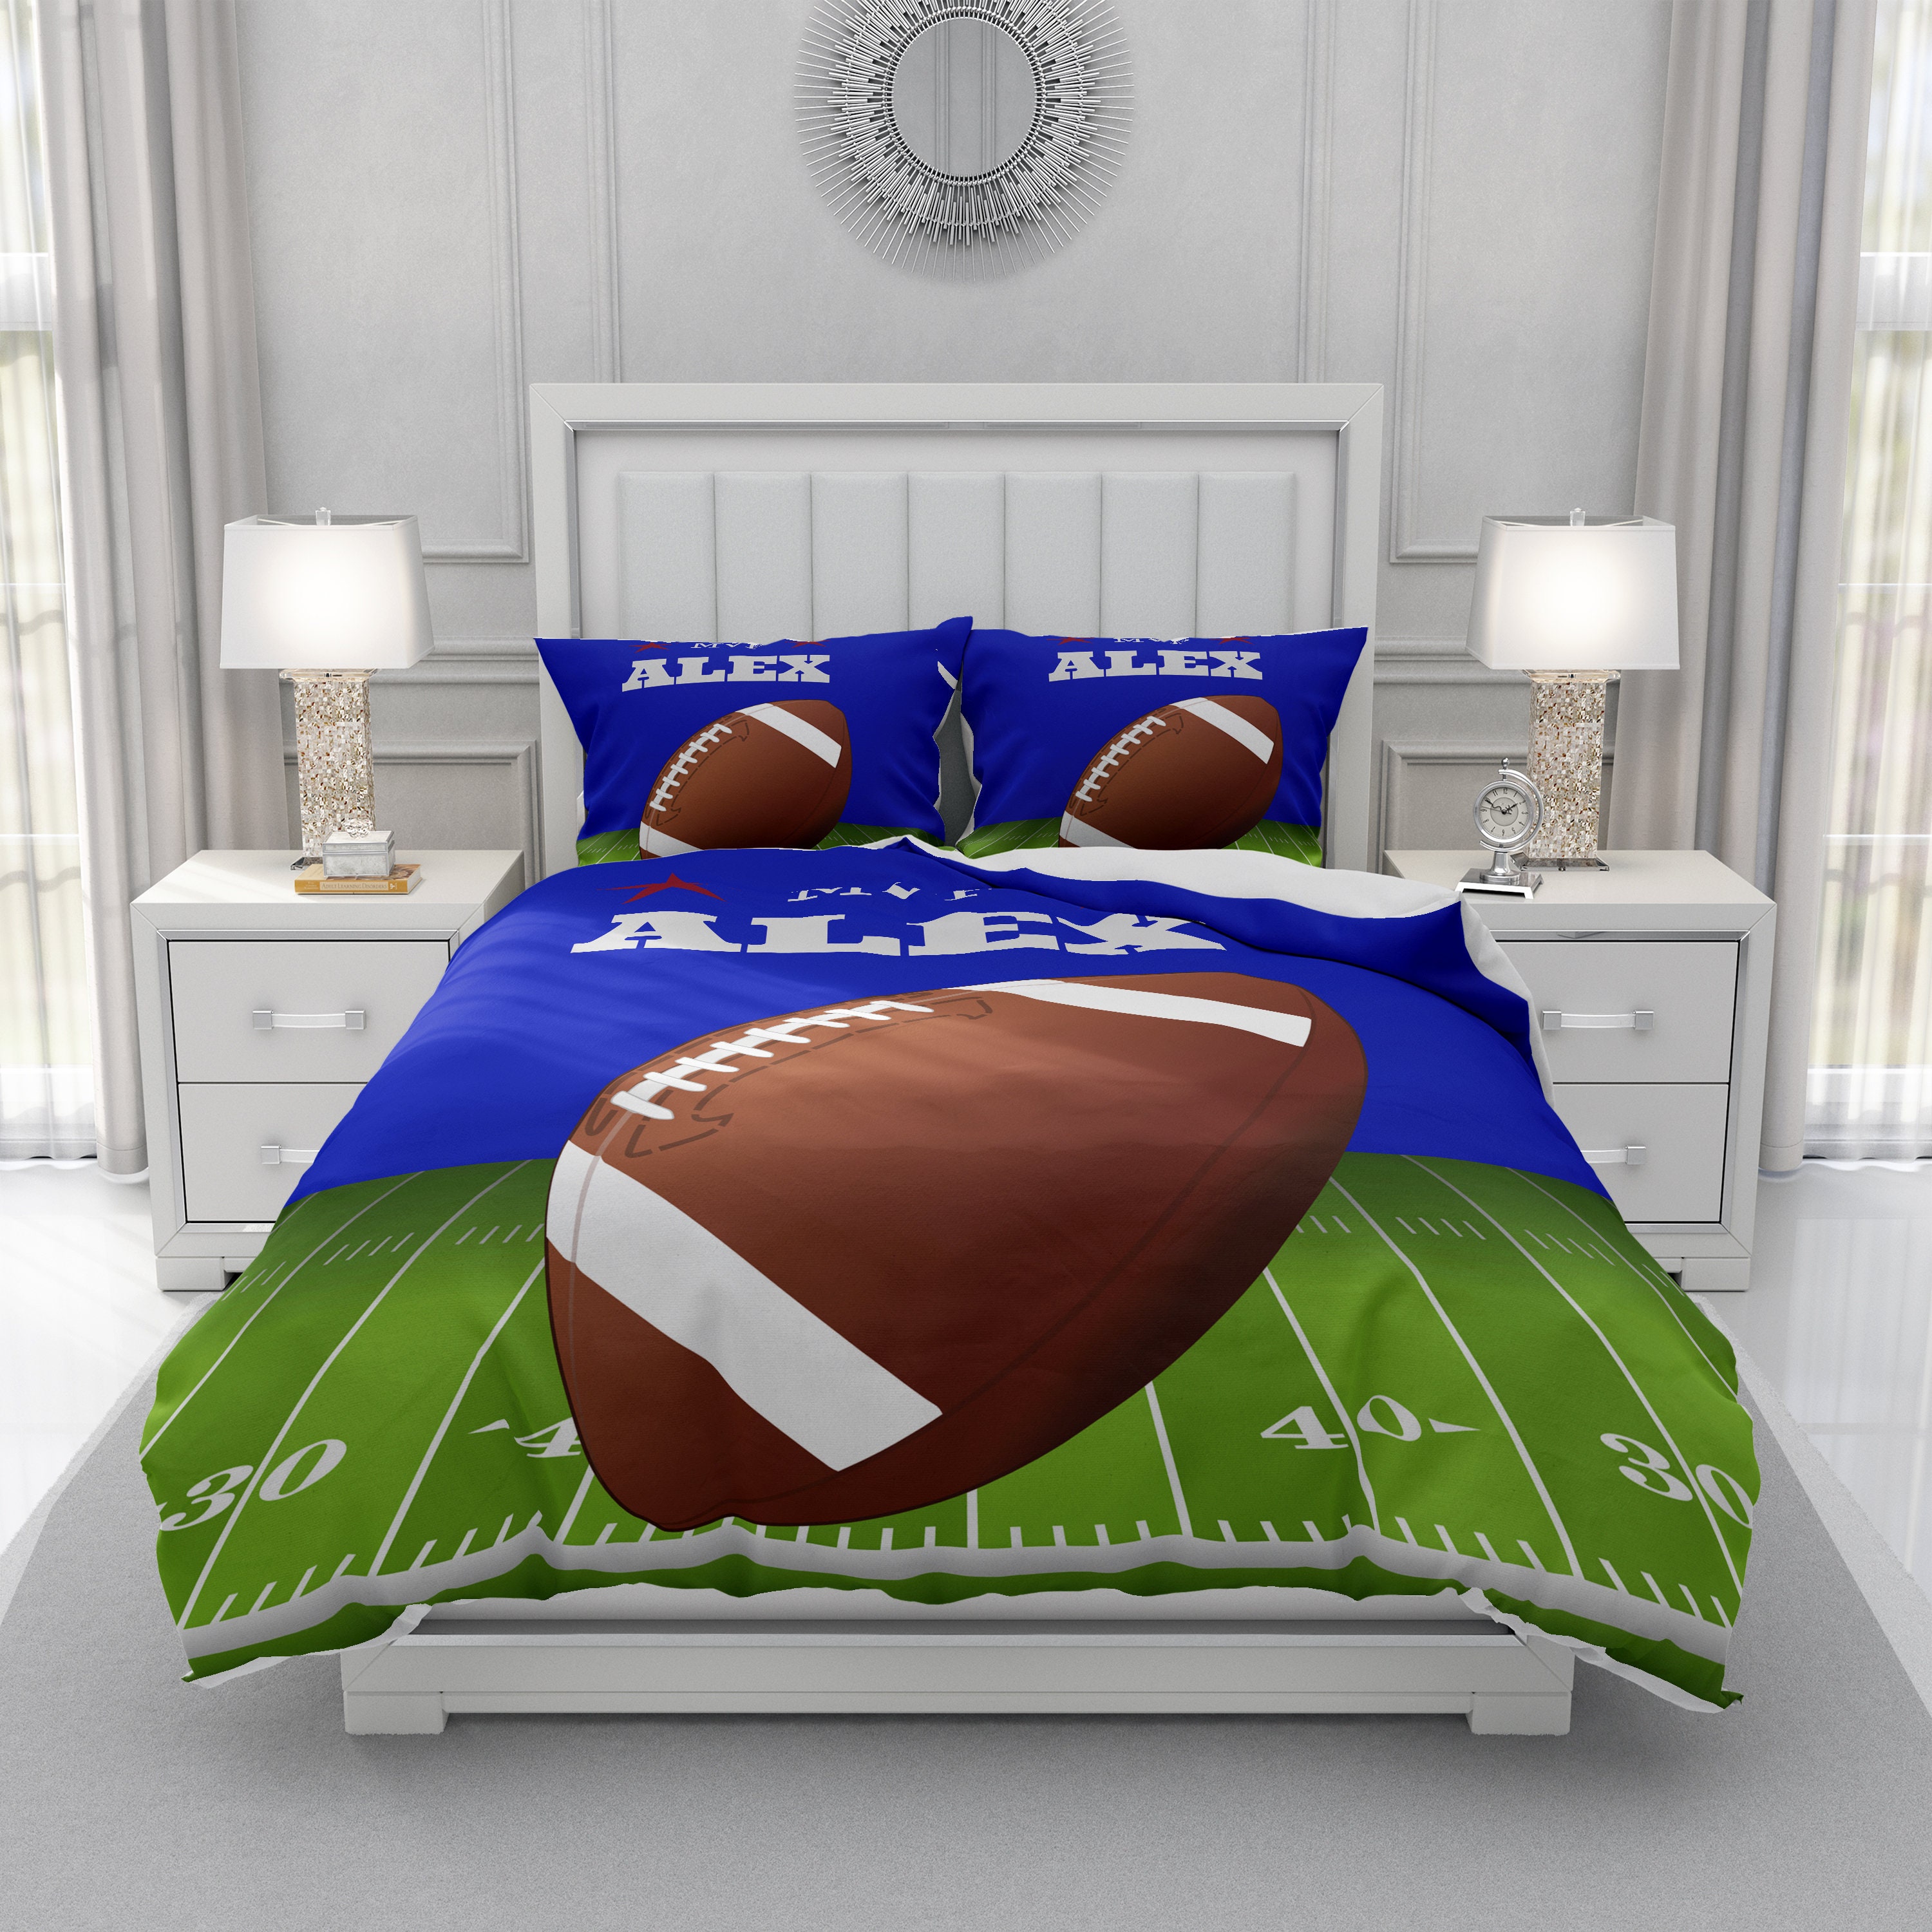 Personalized Youth Football Bedding Blue And Green Sports